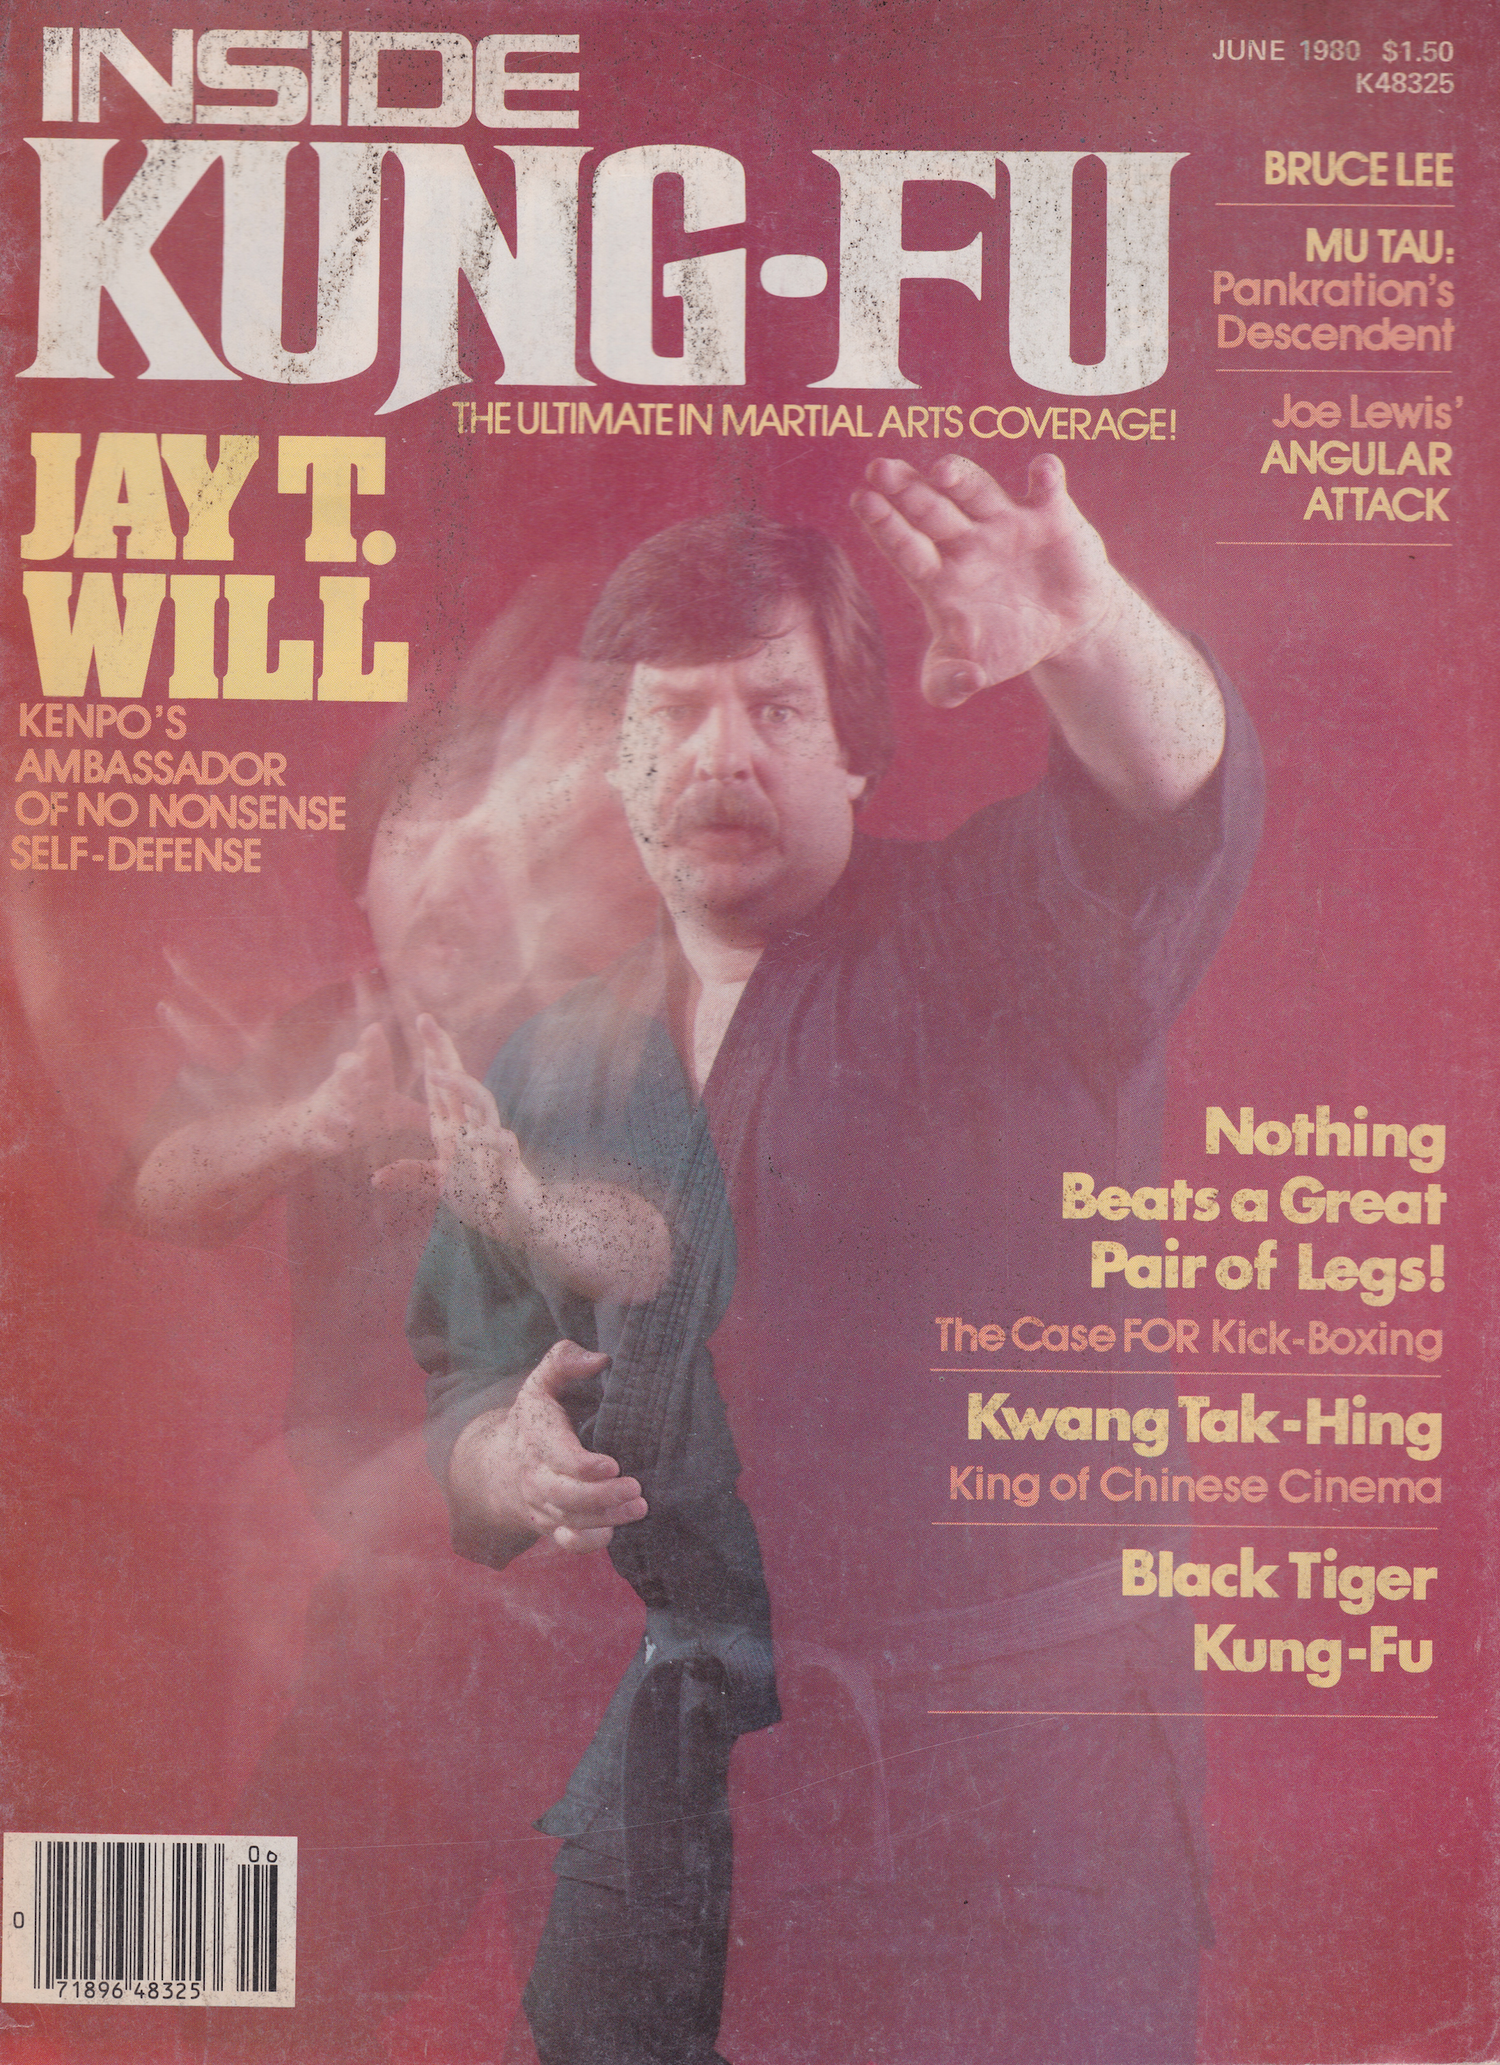 Inside Kung Fu June 1980 Magazine (Preowned)